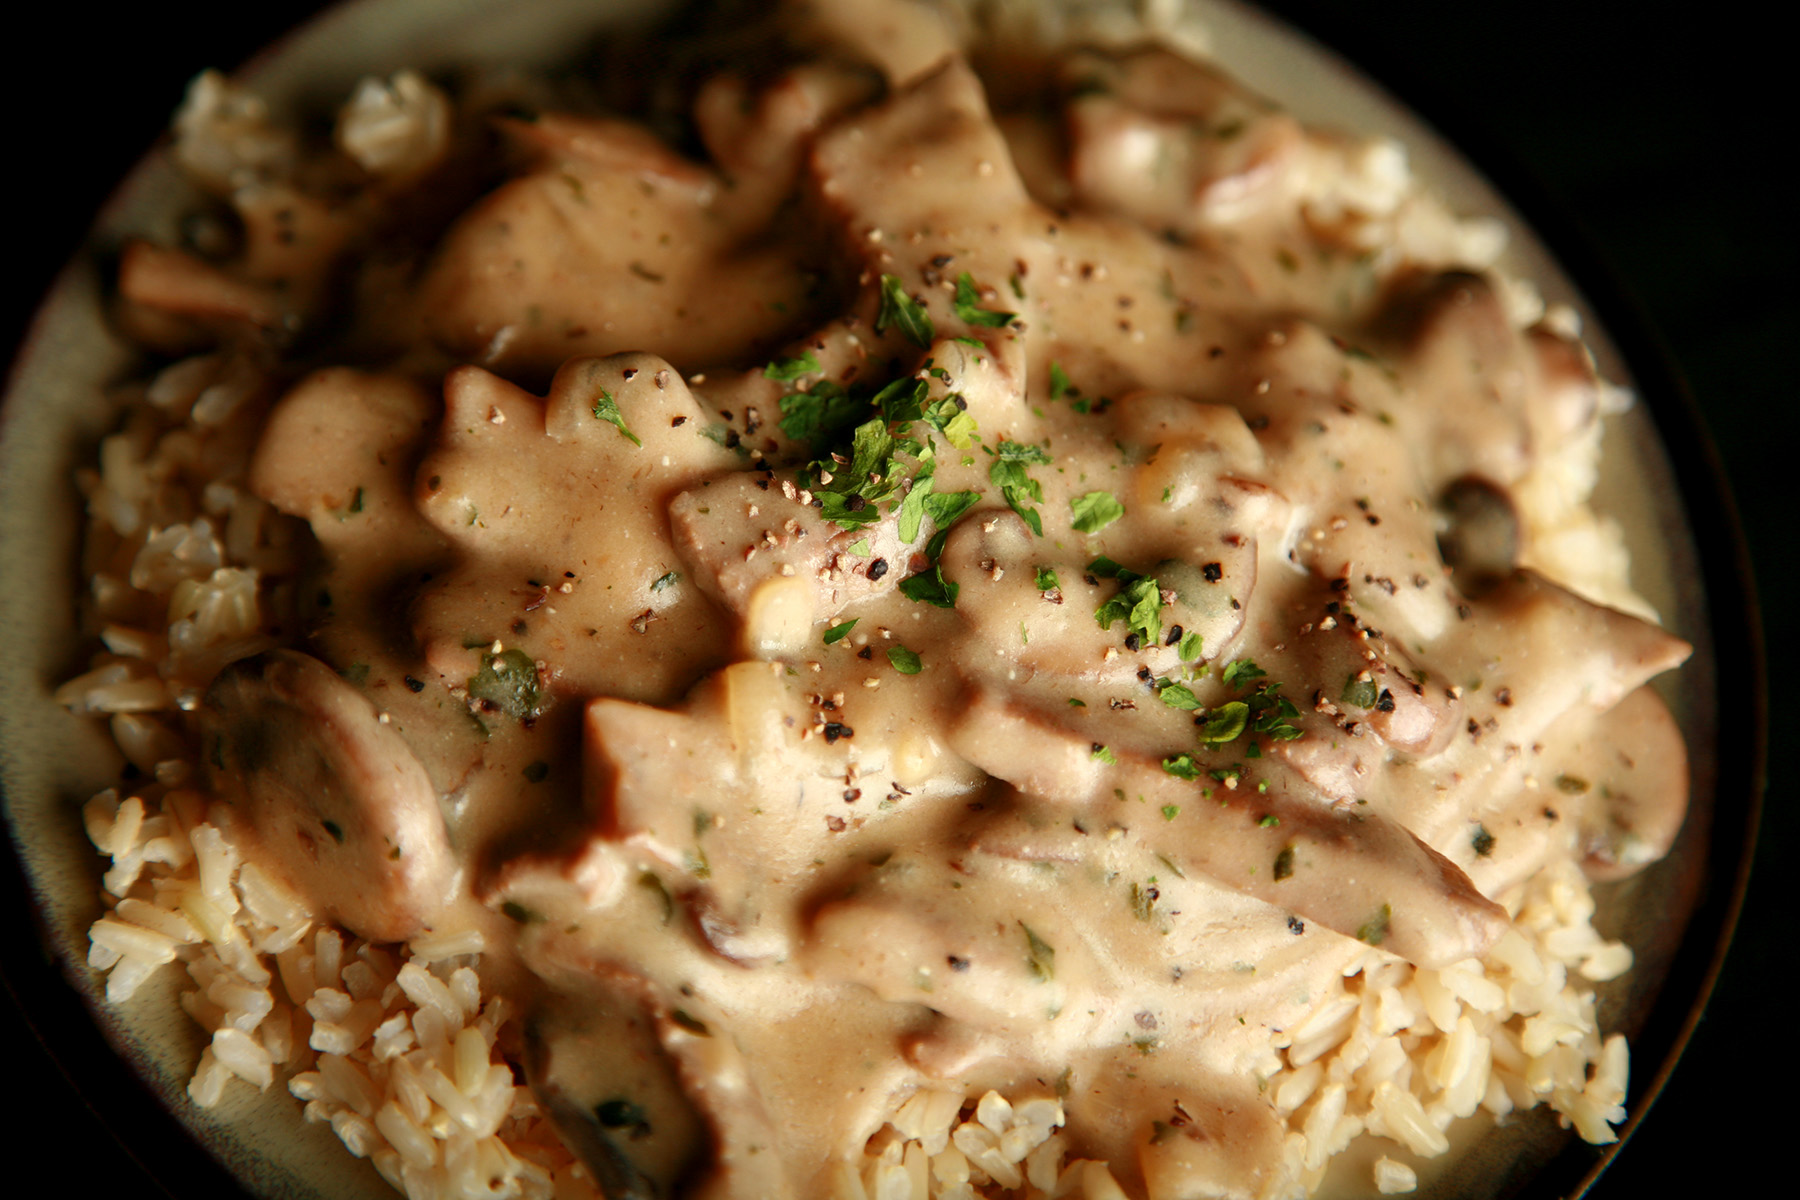 A plate of gluten-free beef stroganoff over rice.